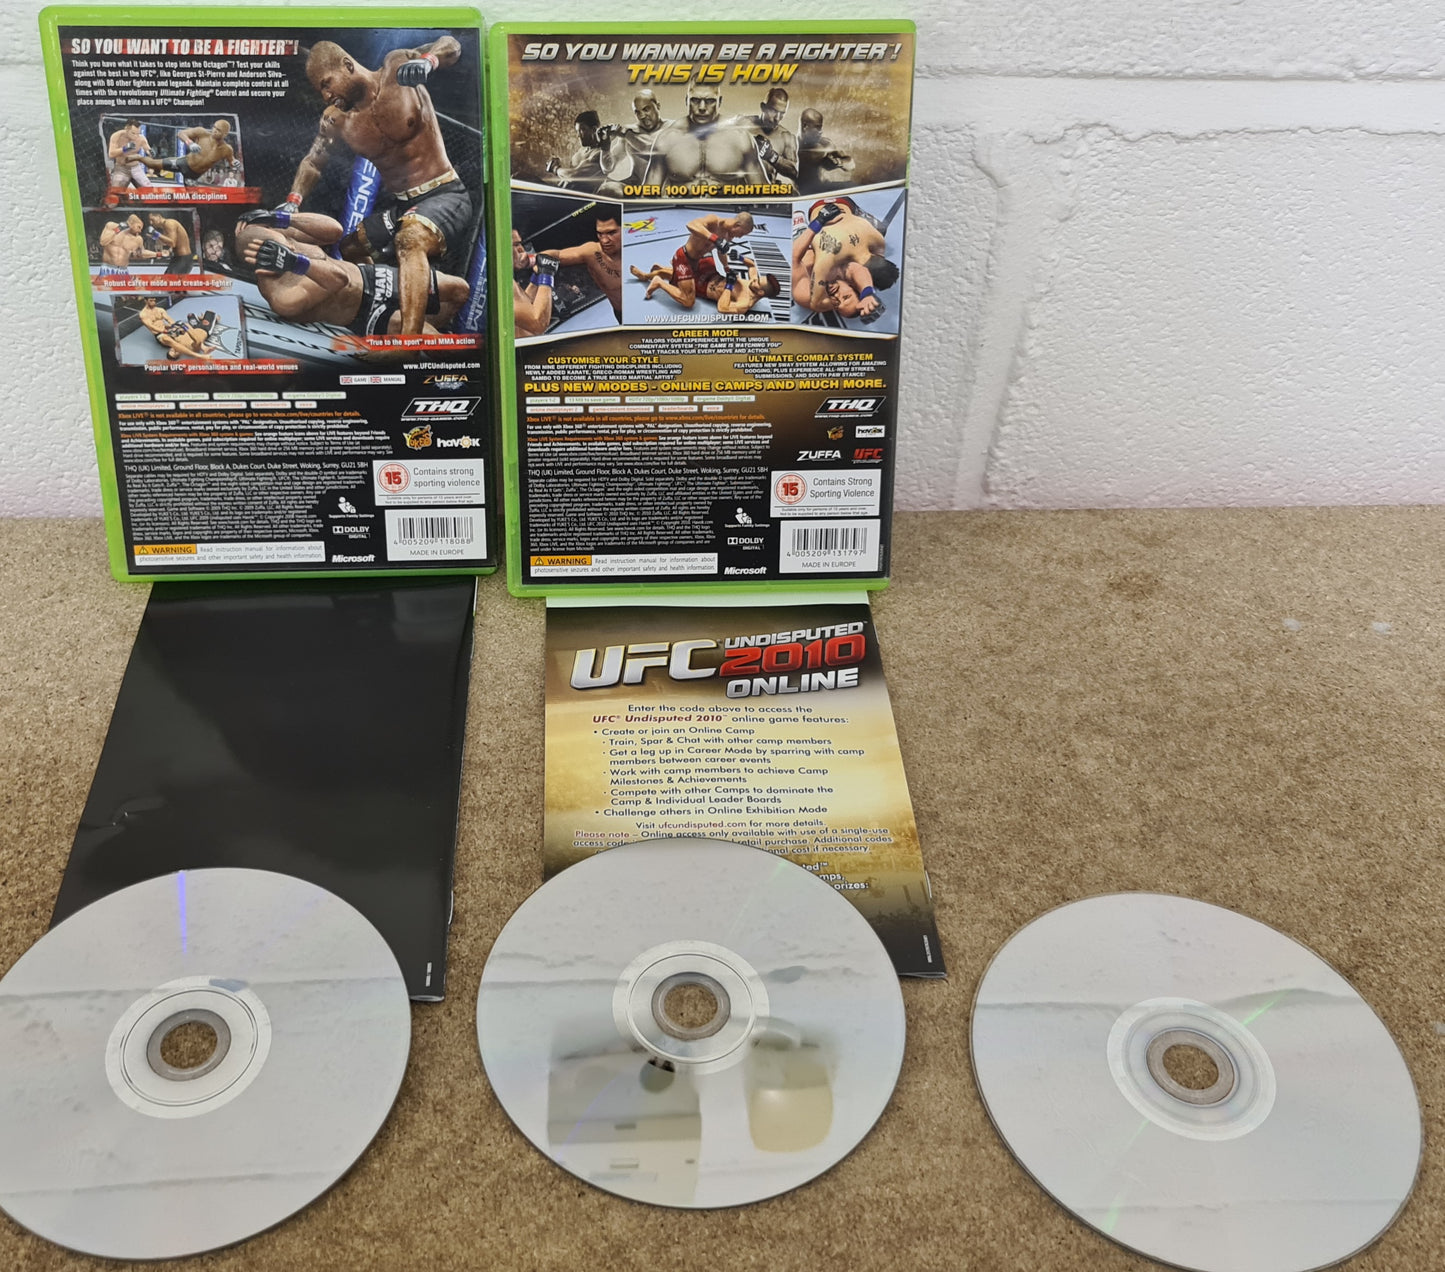 UFC Undisputed 2009 & 2010 with RARE Fight Night DVD Microsoft Xbox 360 Game Bundle